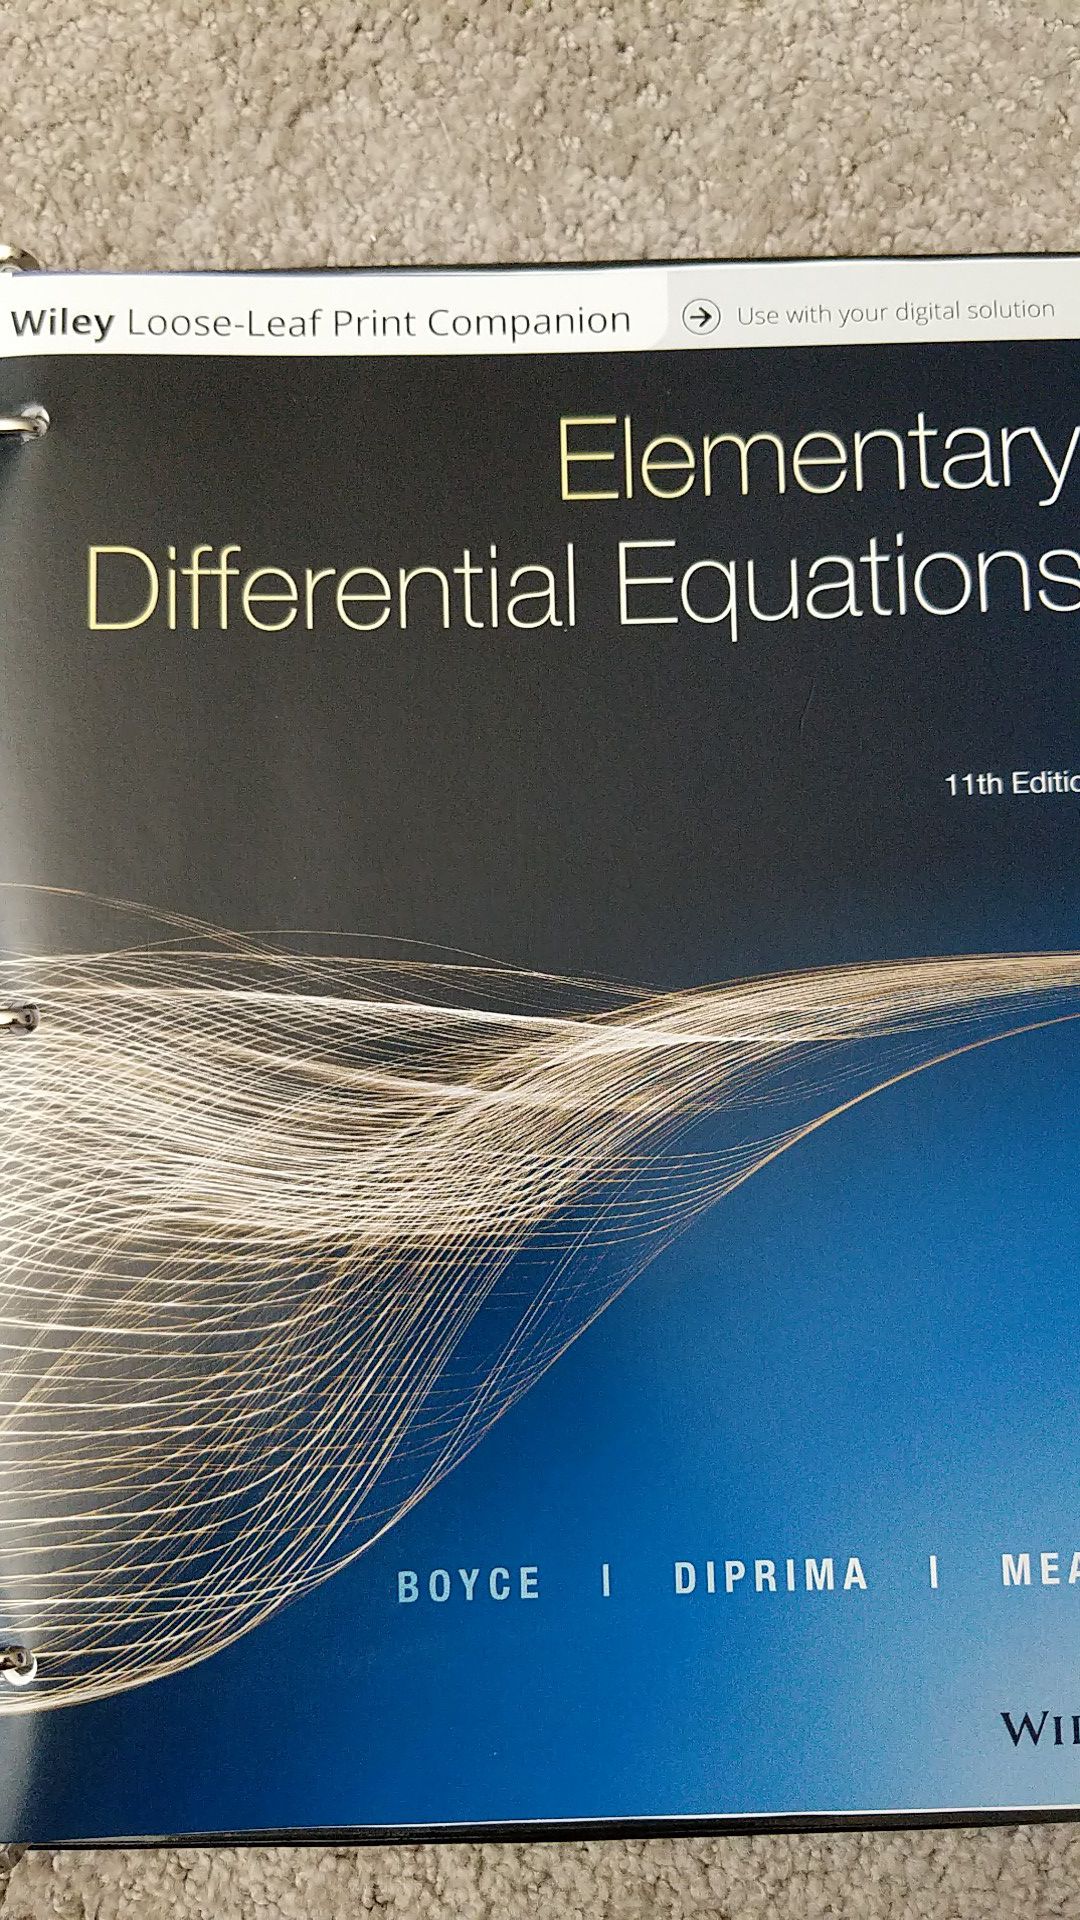 Elementary Differential Equations textbook